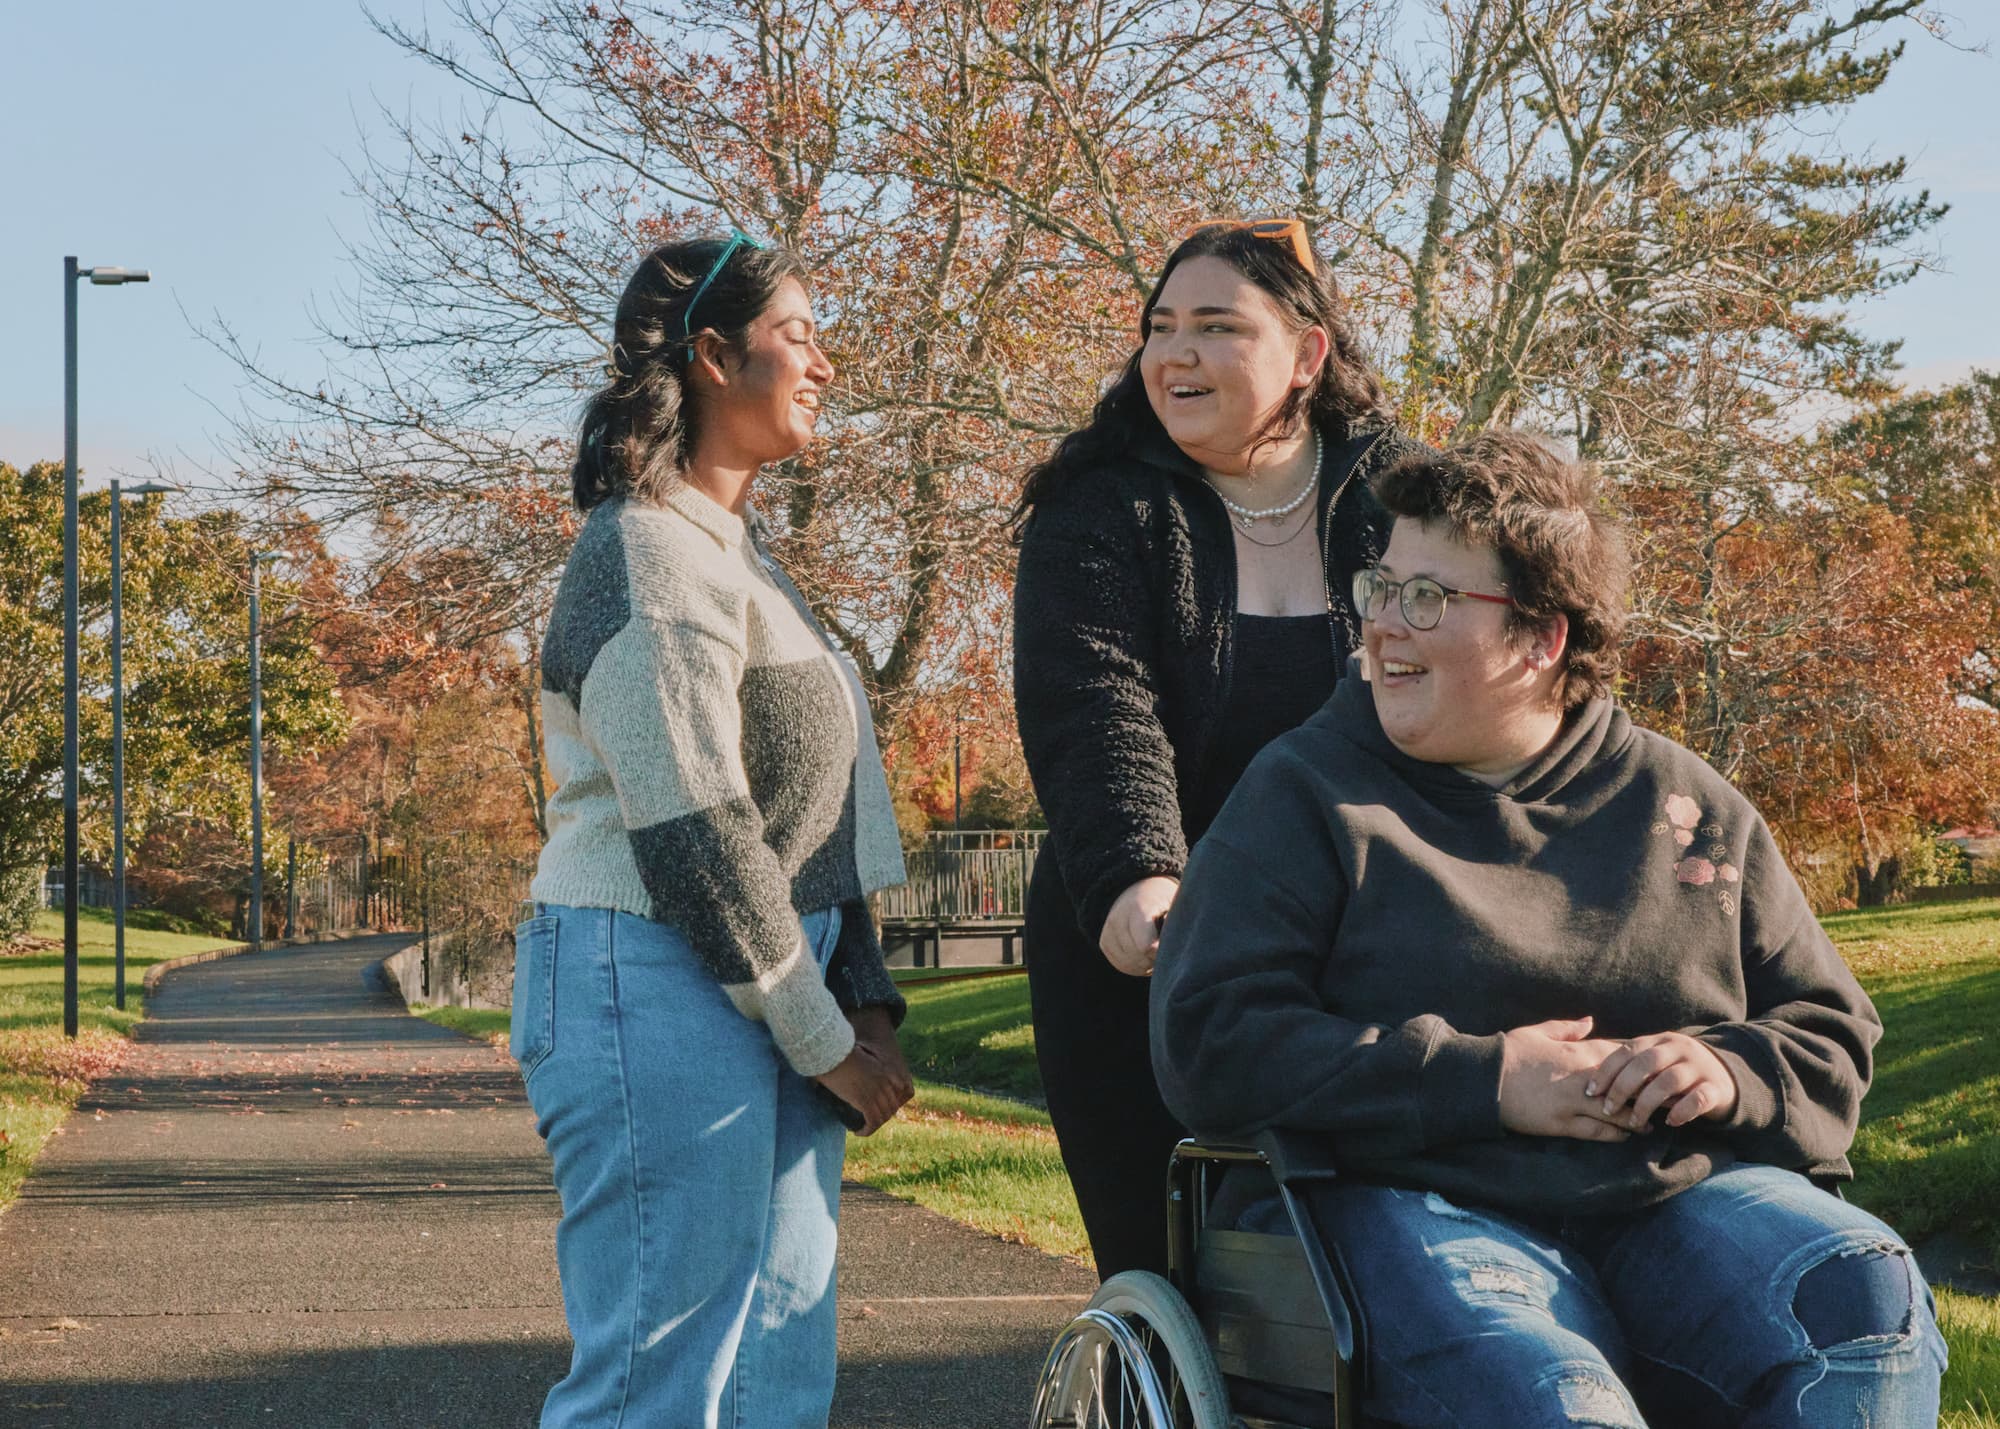 young person in a wheel chair with two friends on a walk in the park